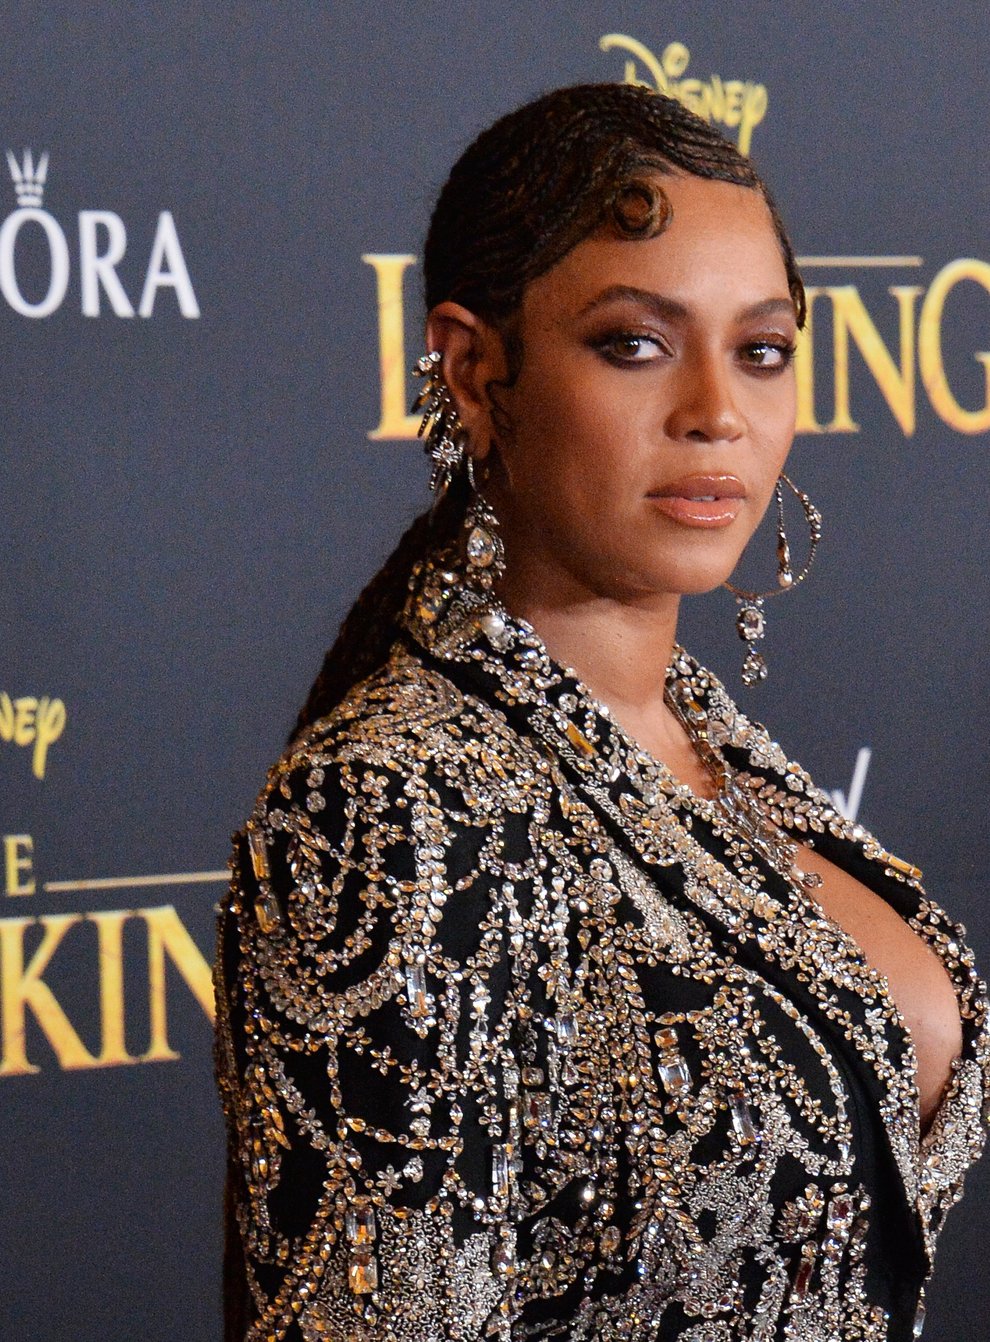 Beyonce has released a trailer for her film